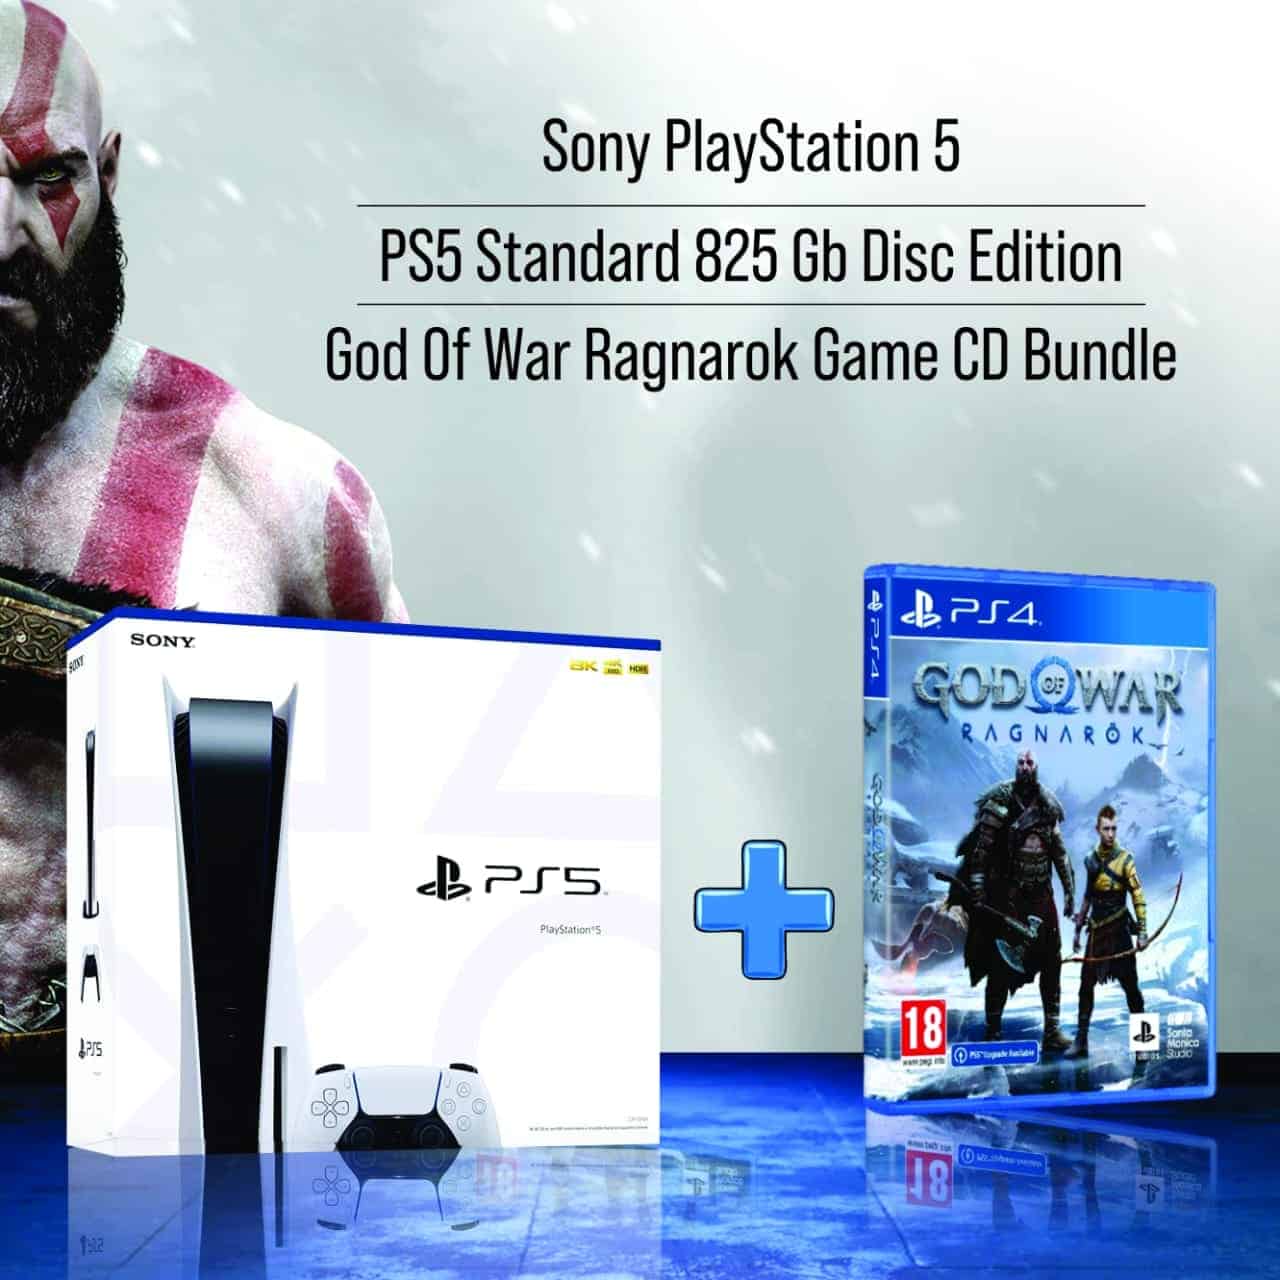 Buy PS5 Edition @ Best Price | 825 GB | Available